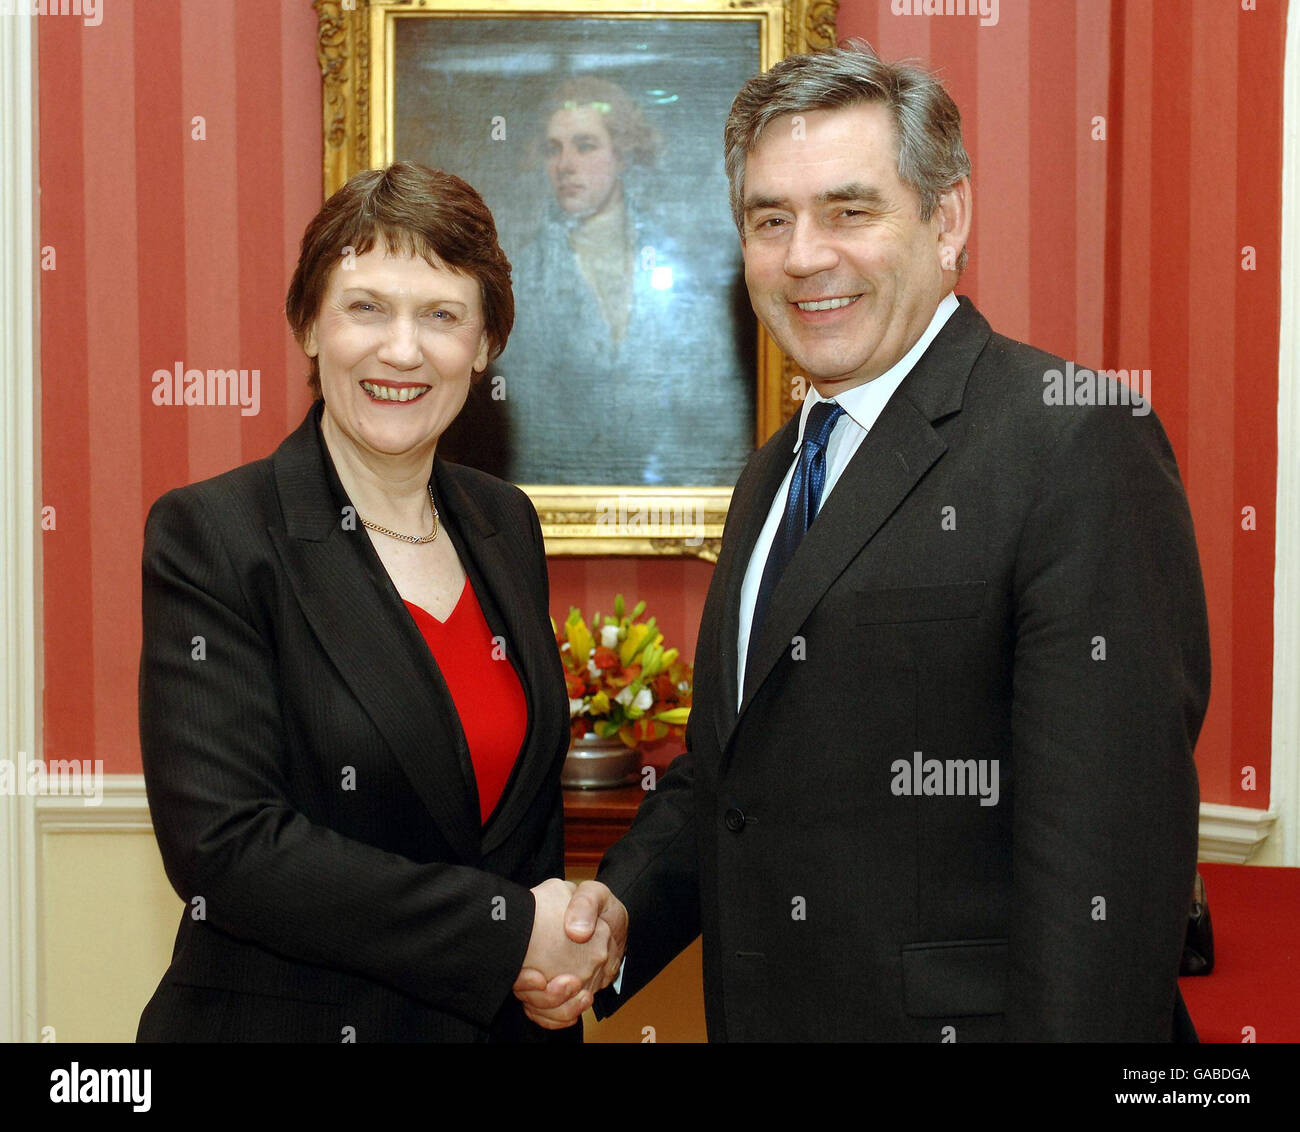 The Prime Minister Gordon Brown shakes hands with Helen Clark, the Prime Minister of New Zealand, when they met at Downing Street this afternoon. Stock Photo